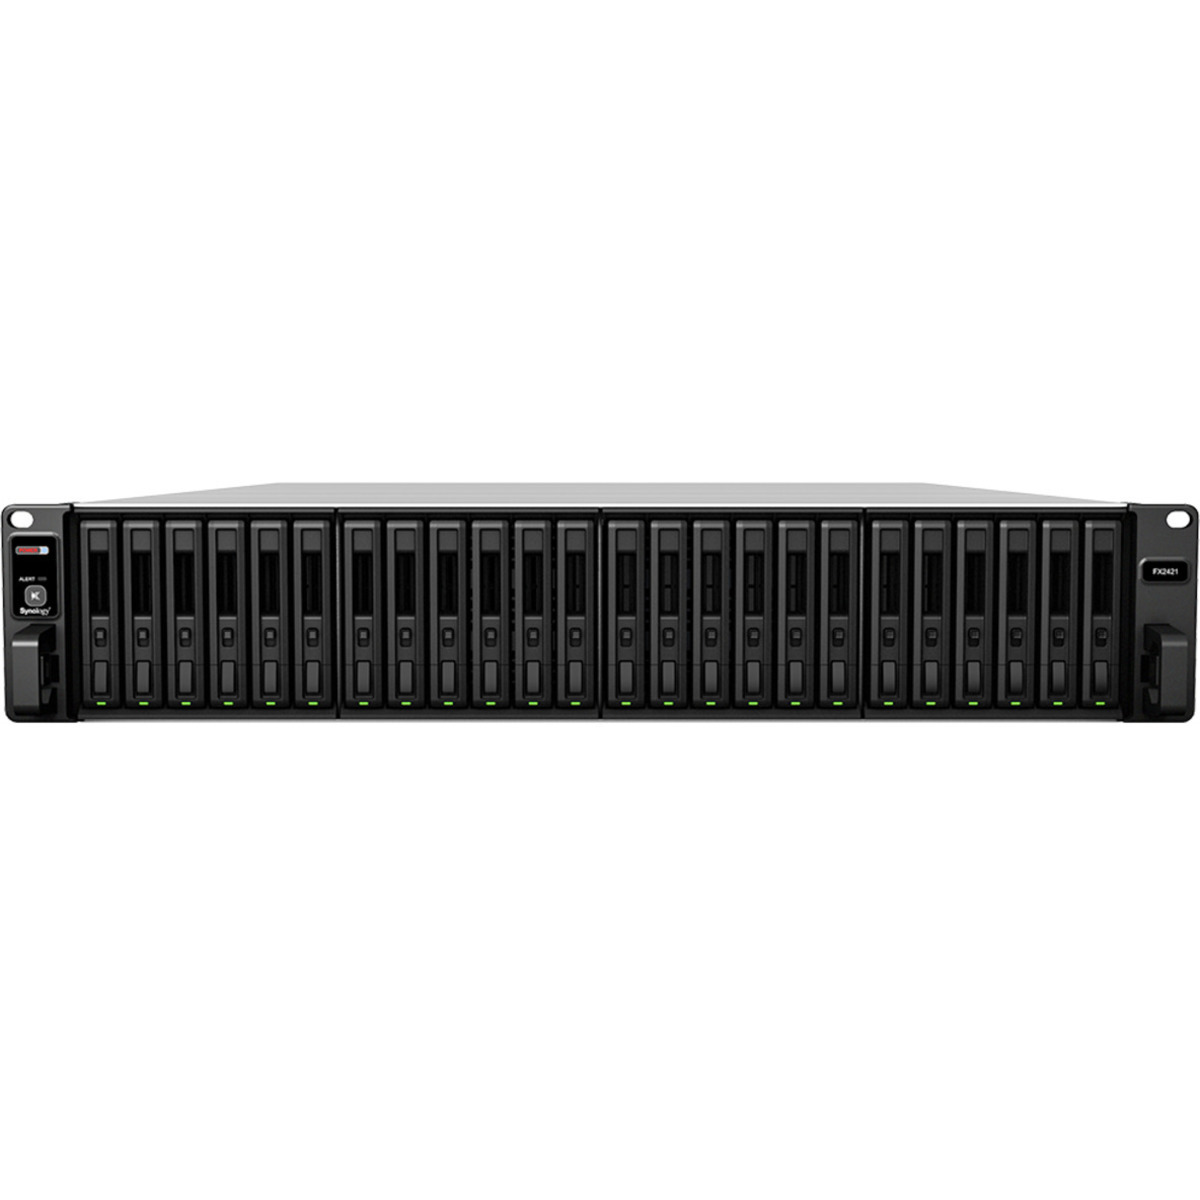 Synology FX2421 External Expansion Drive 11tb 24-Bay RackMount Large Business / Enterprise Expansion Enclosure 22x500gb Sandisk Ultra 3D SDSSDH3-500G 2.5 560/520MB/s SATA 6Gb/s SSD CONSUMER Class Drives Installed - Burn-In Tested FX2421 External Expansion Drive